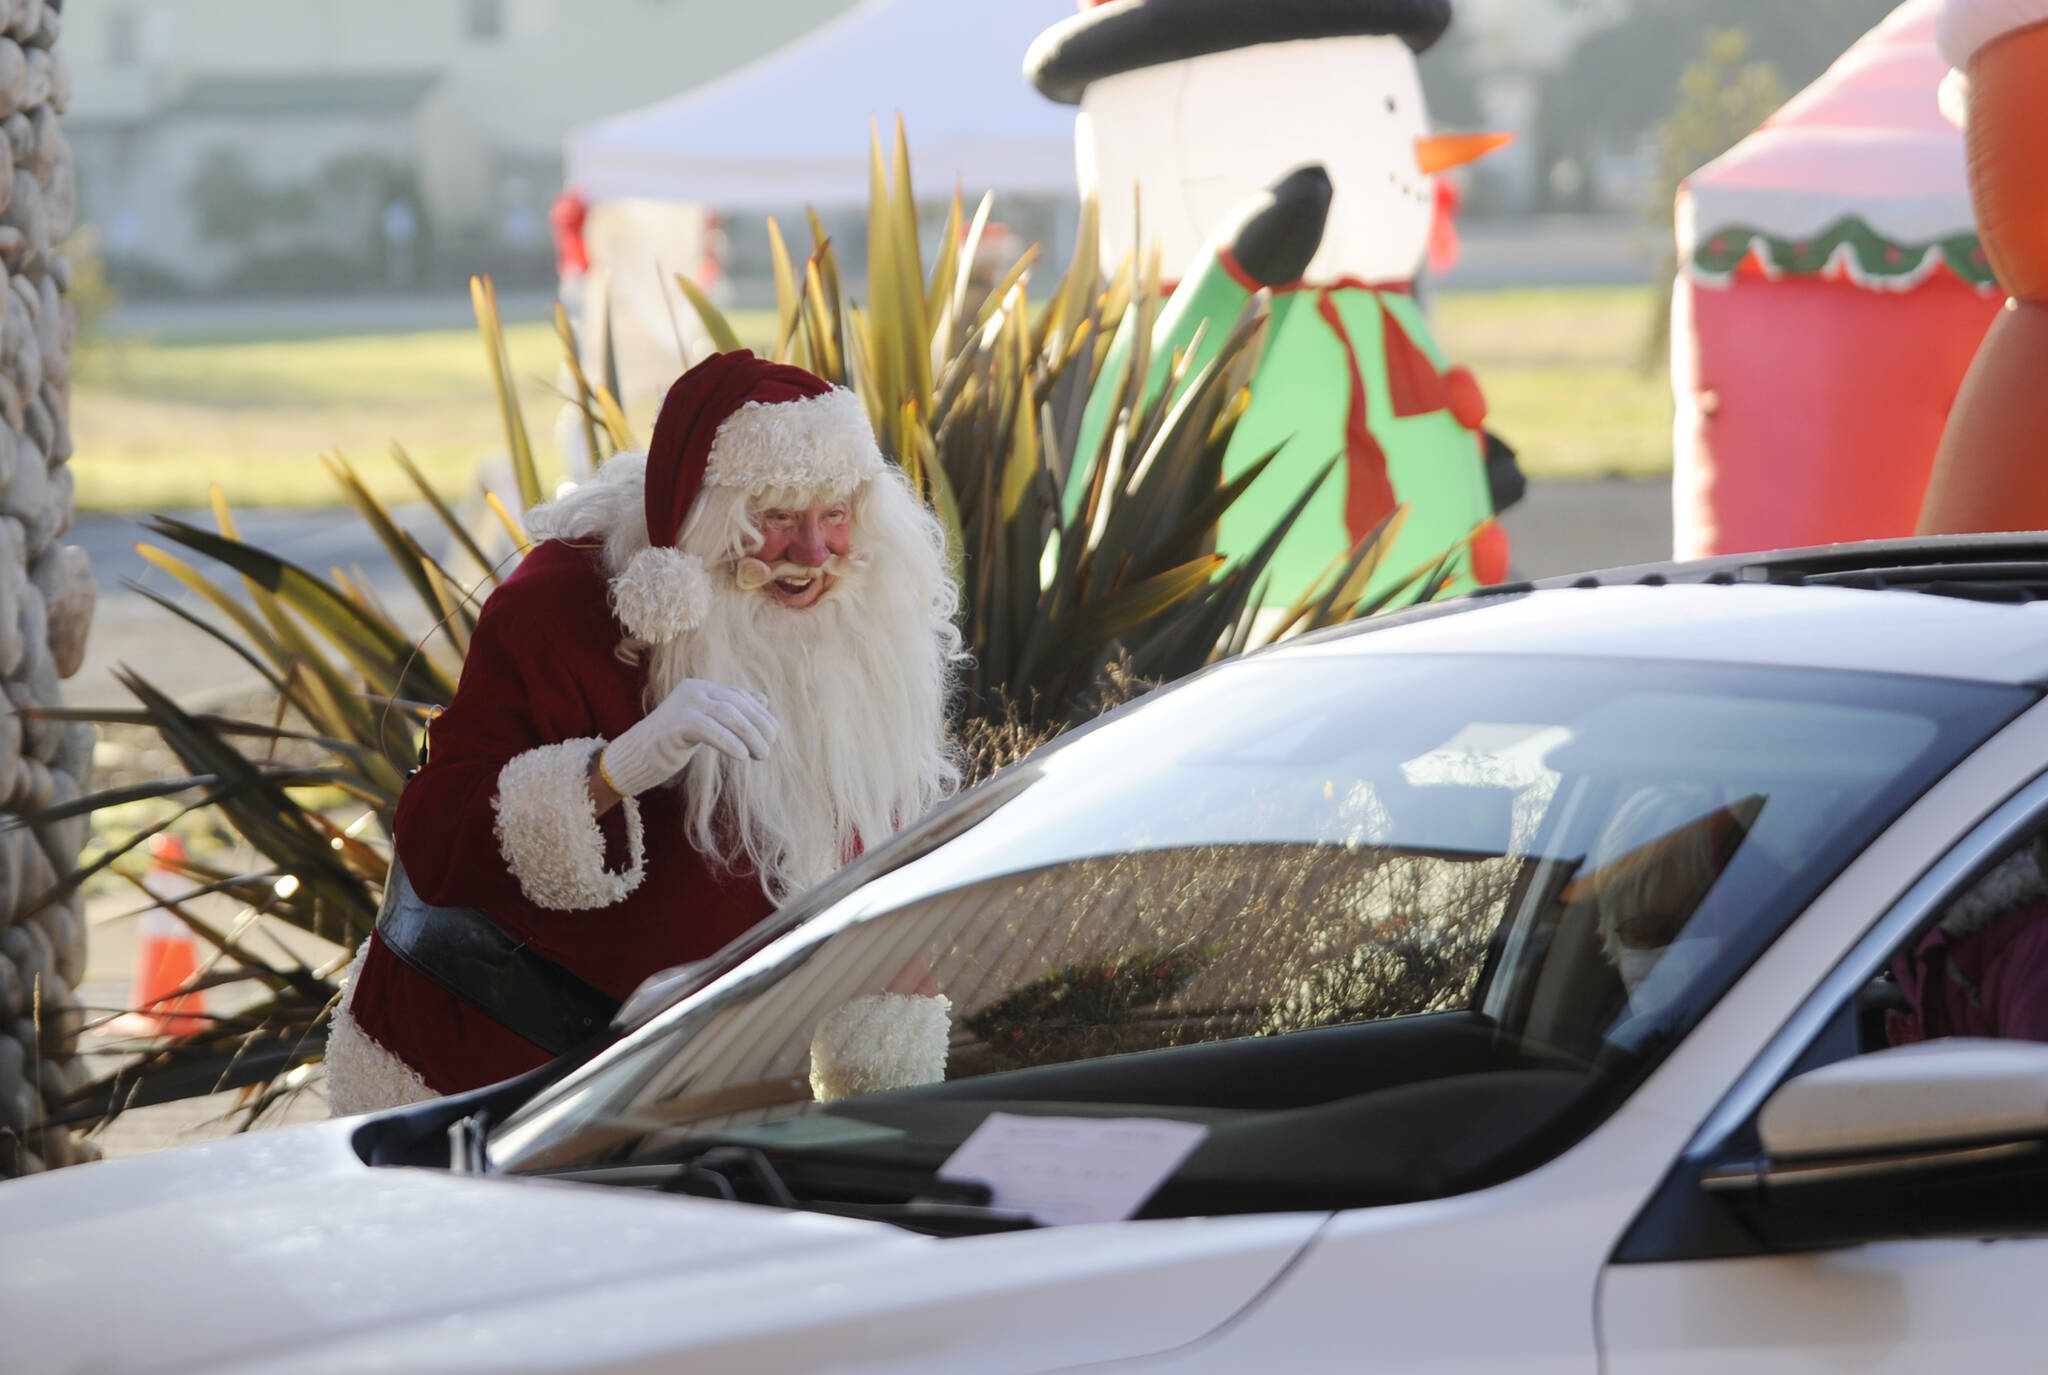 Santa Claus (Mac Macdonald) greets attendees of the “Say Hello to Santa” drive-by event on at Dungeness Valley Lutheran Church in December 2020. Hosted by First Teacher and the Parenting Matters Foundation, the event saw youths receiving a goodie bag while spending a socially-distanced visit with Mr. Claus and his group of group of volunteer elves. Sequim Gazette file photo by Michael Dashiell